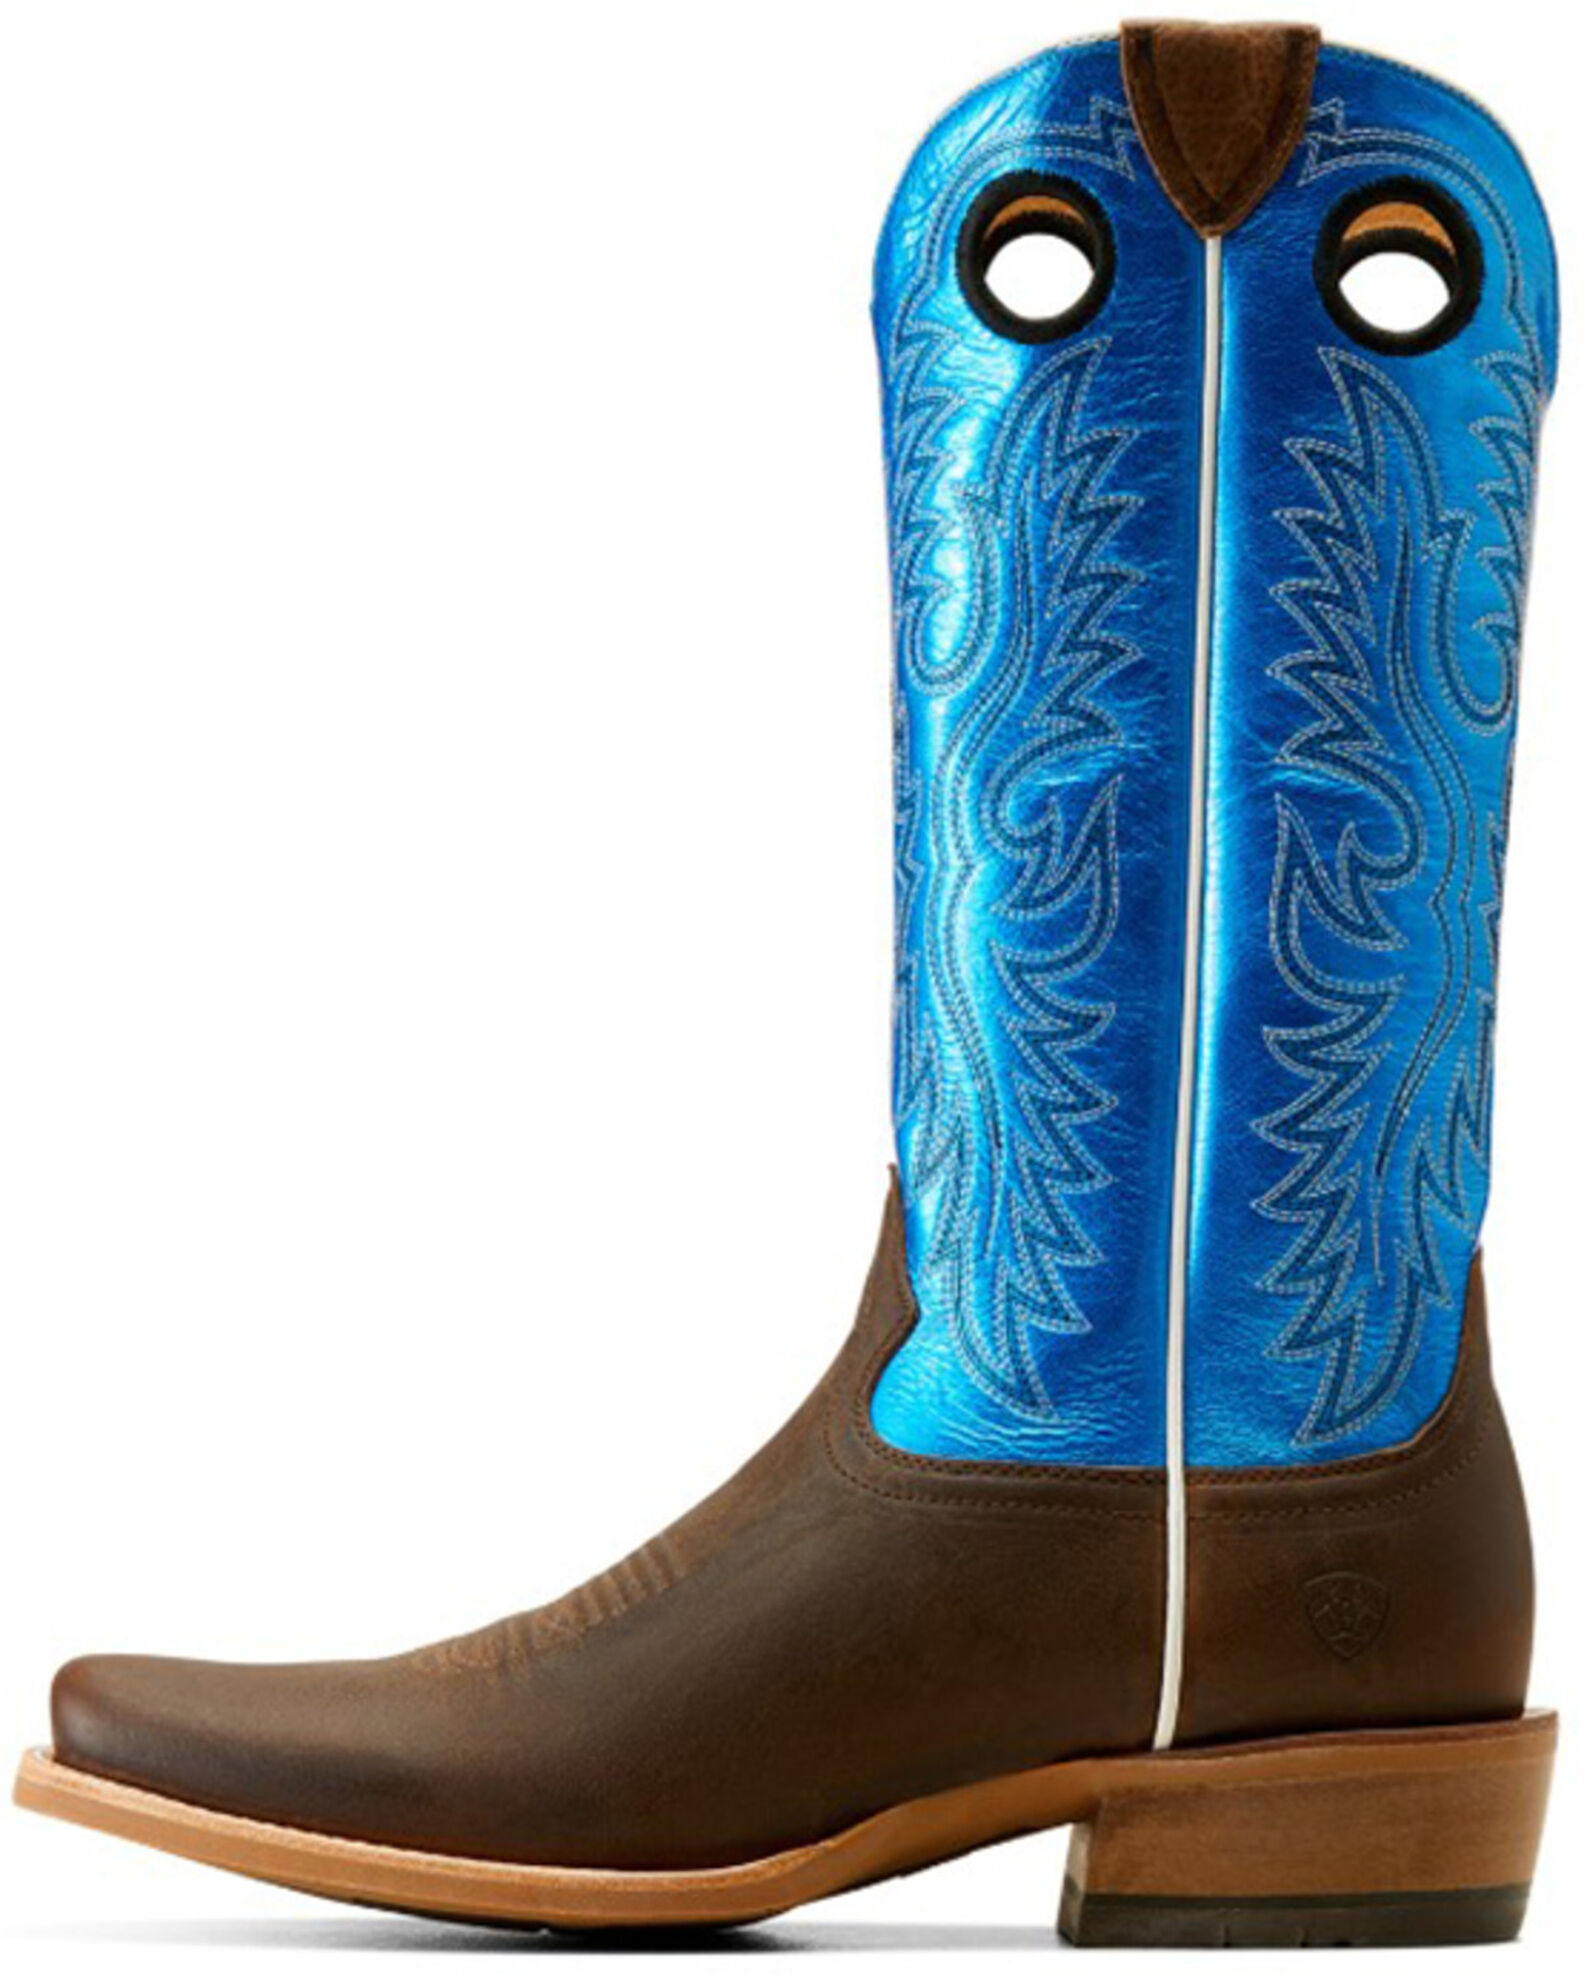 Product Name: Ariat Men's Ringer Tall Western Boots - Square Toe